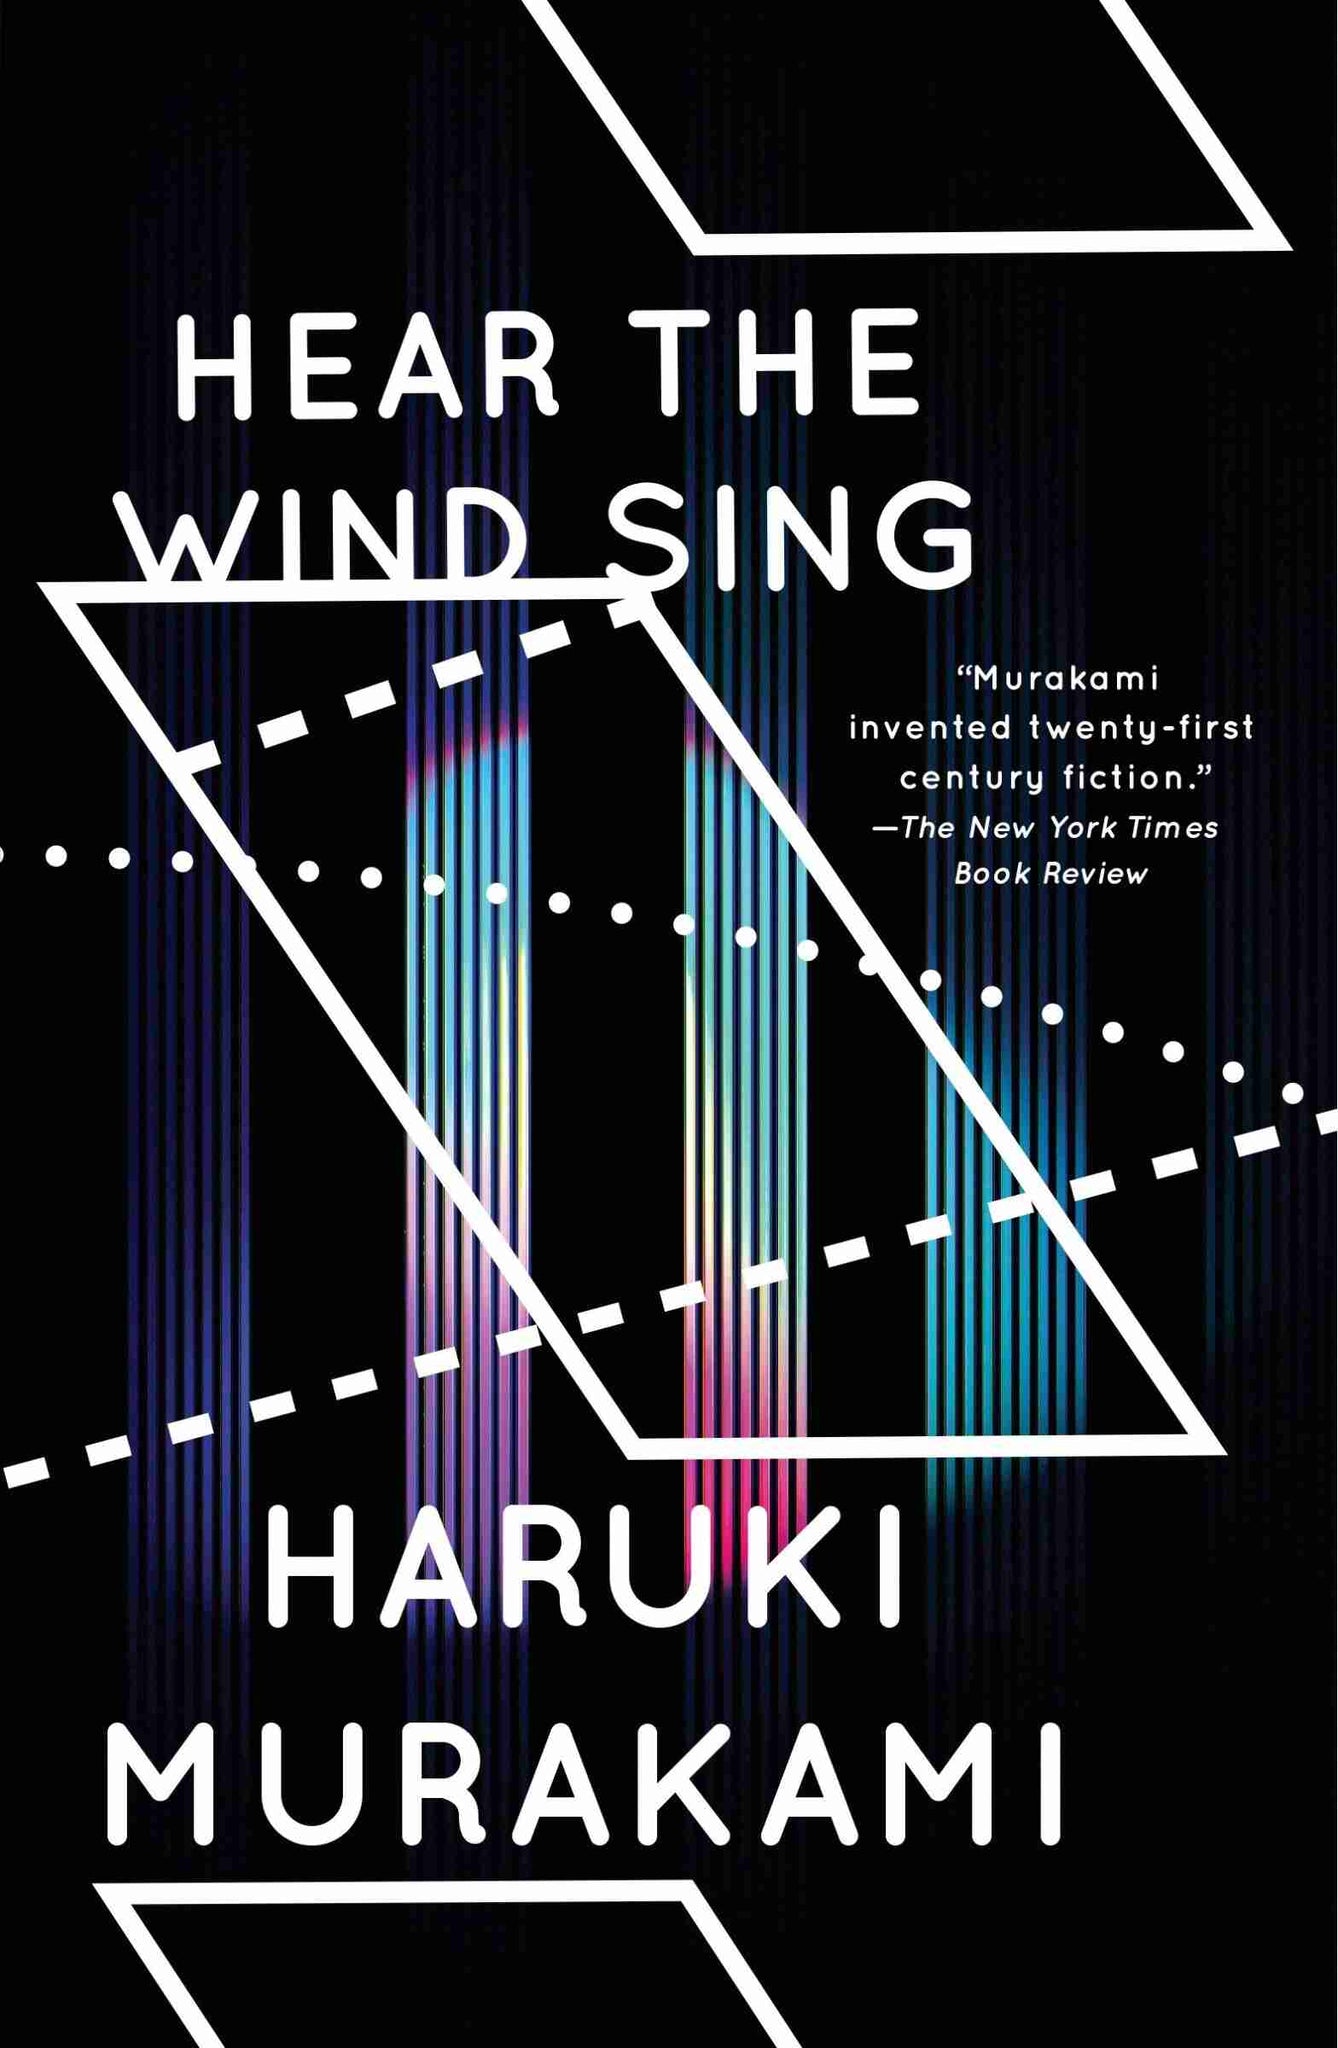 Wind/Pinball : Hear the Wind Sing and Pinball, 1973 (Two Novels)